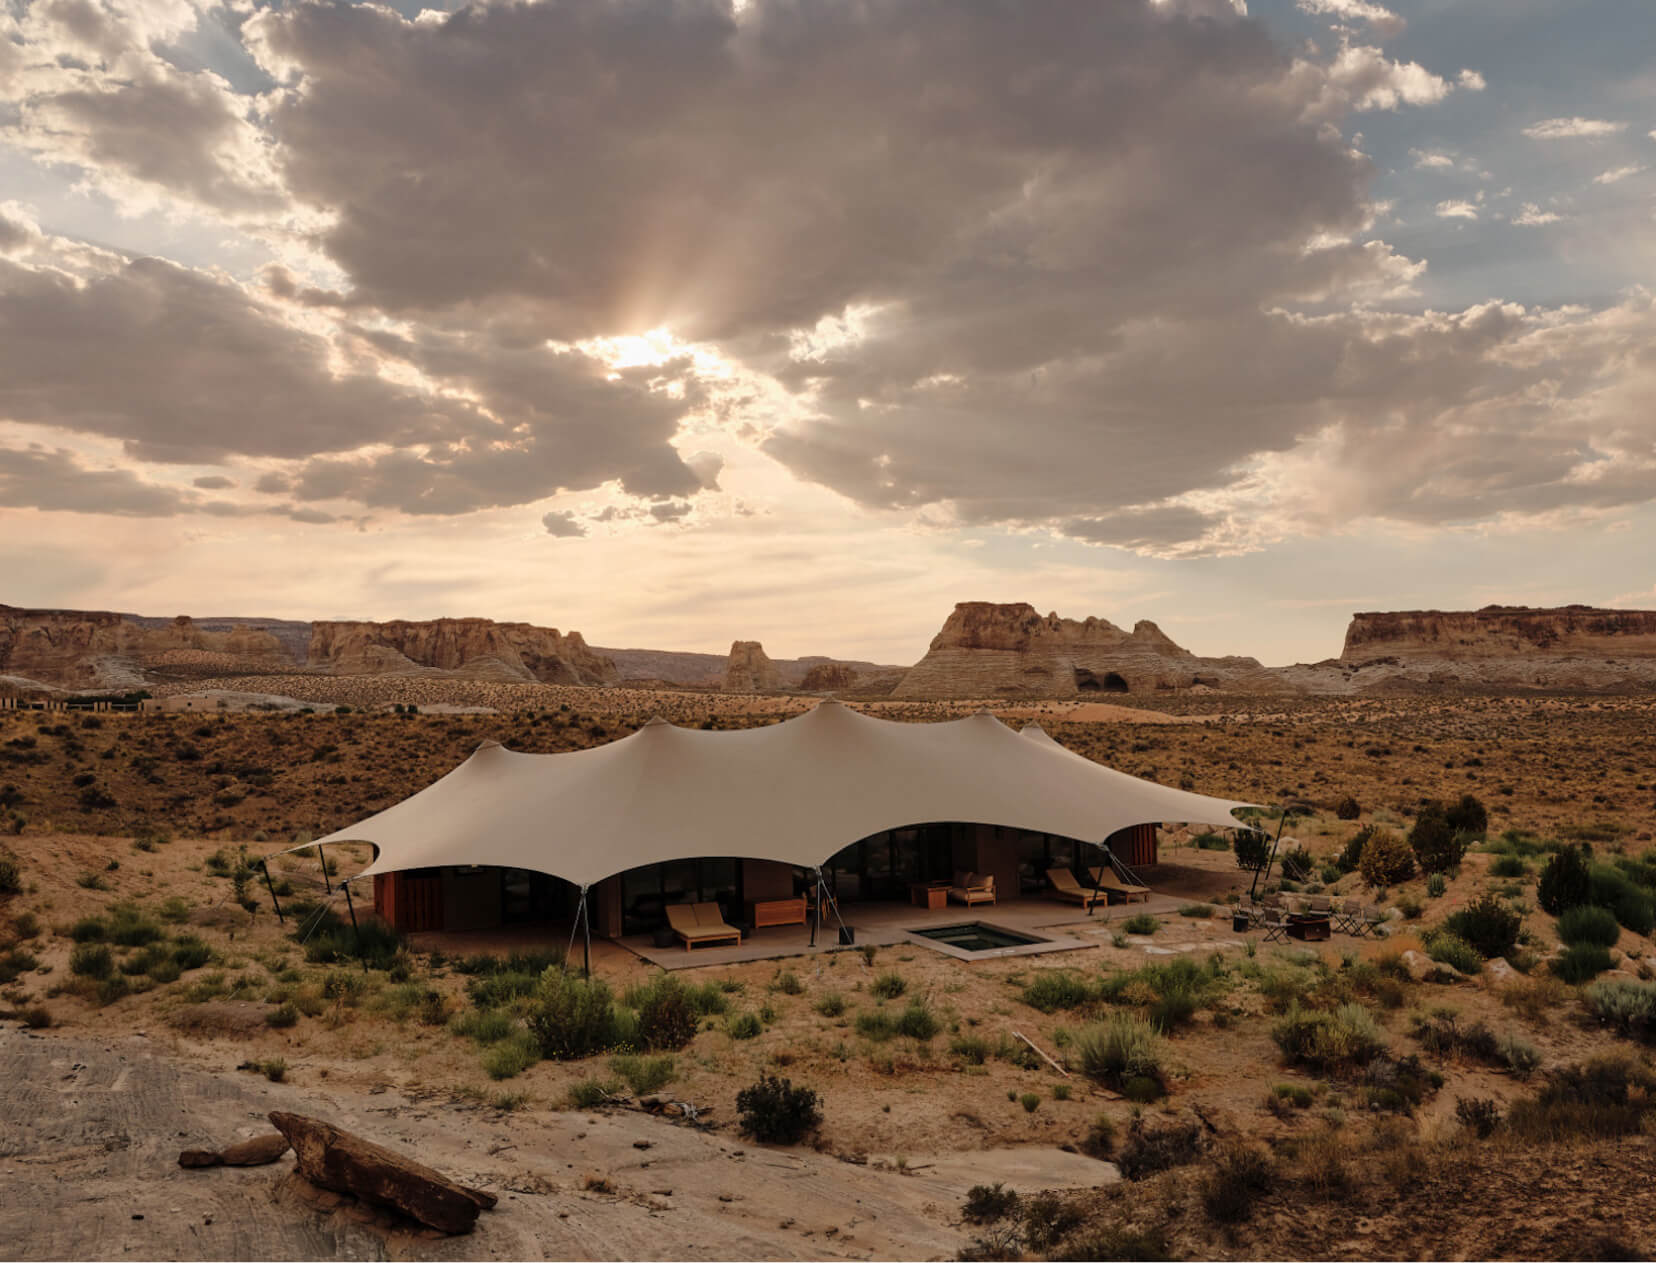 4 Bucket-List Glamping Experiences—and What to Pack